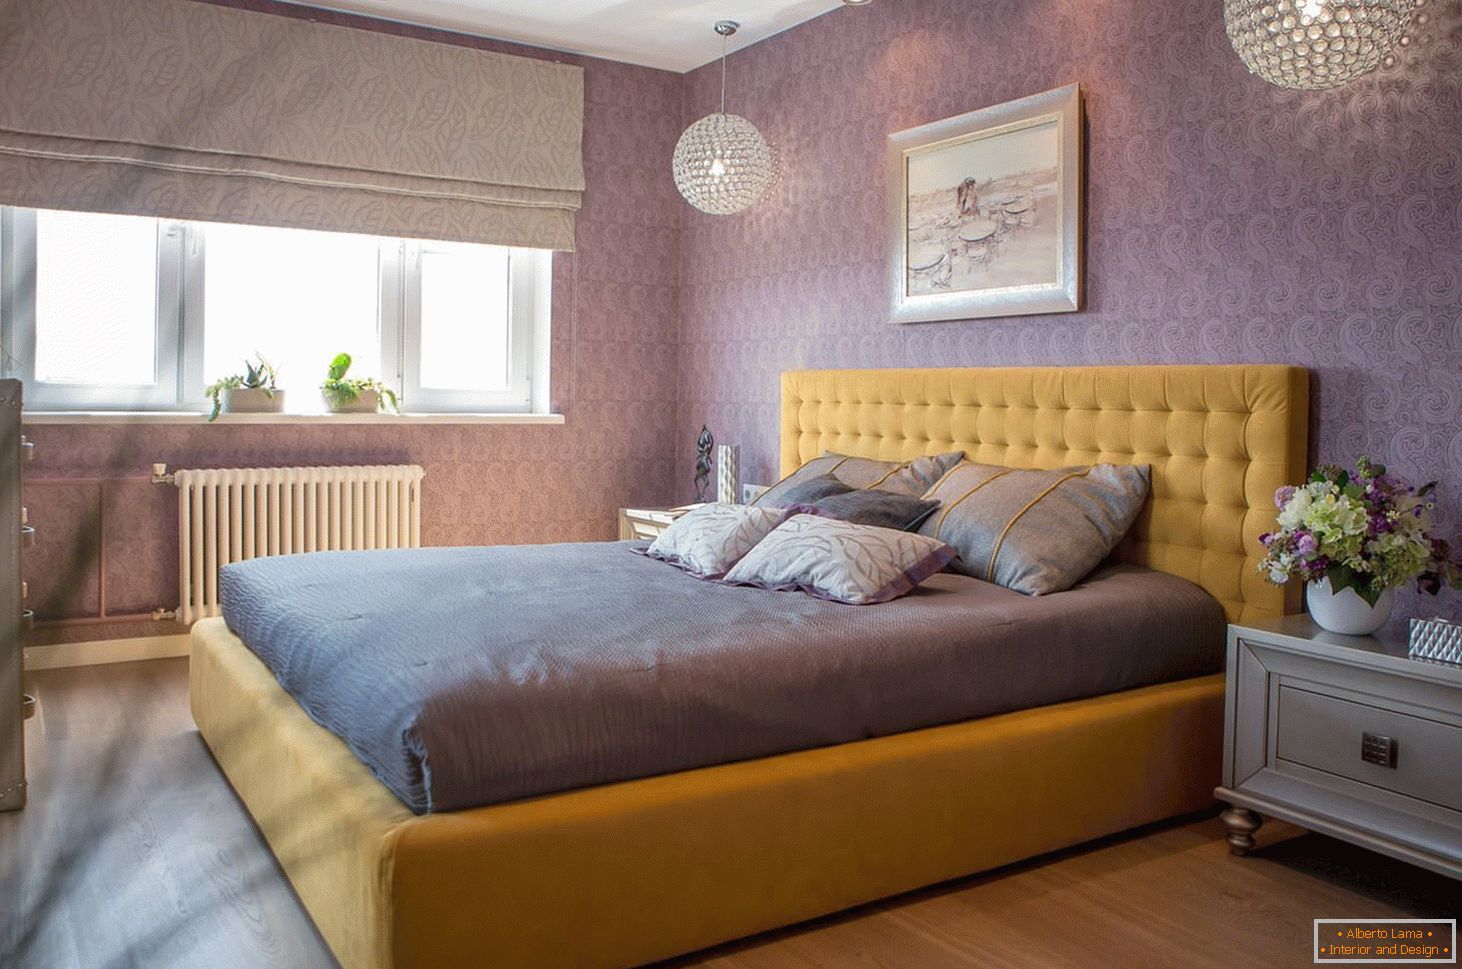 Yellow bed in purple interior